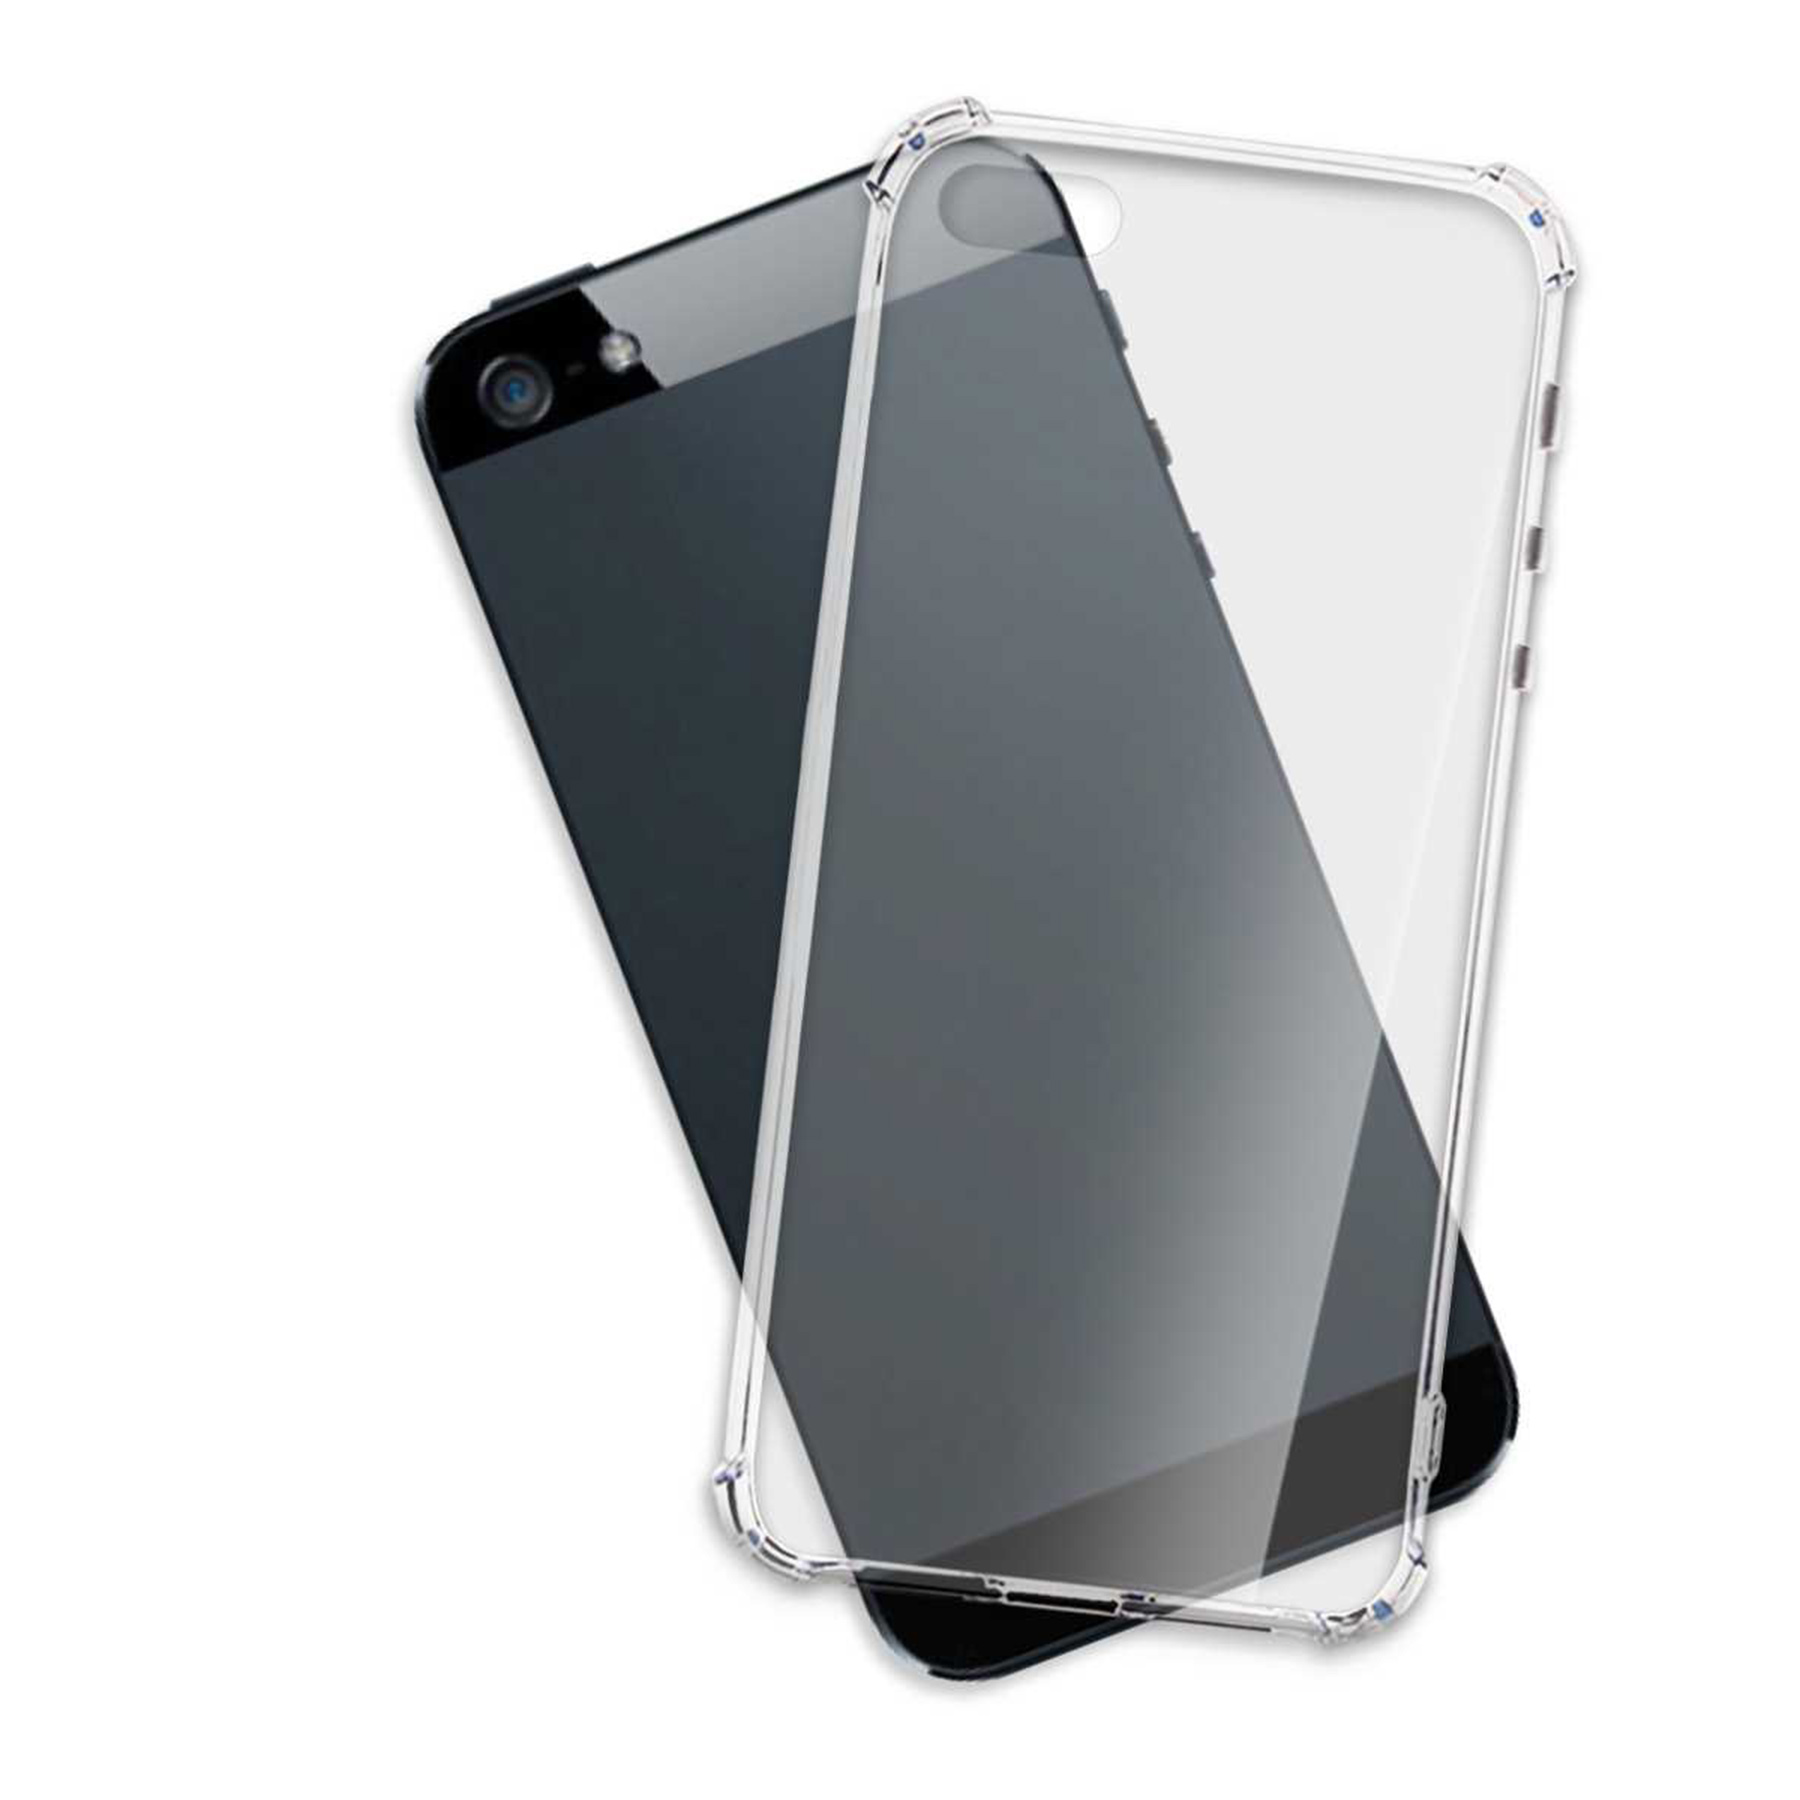 MTB MORE ENERGY Clear SE, Backcover, iPhone 5s, 5, Transparent iPhone Armor iPhone Case, Apple